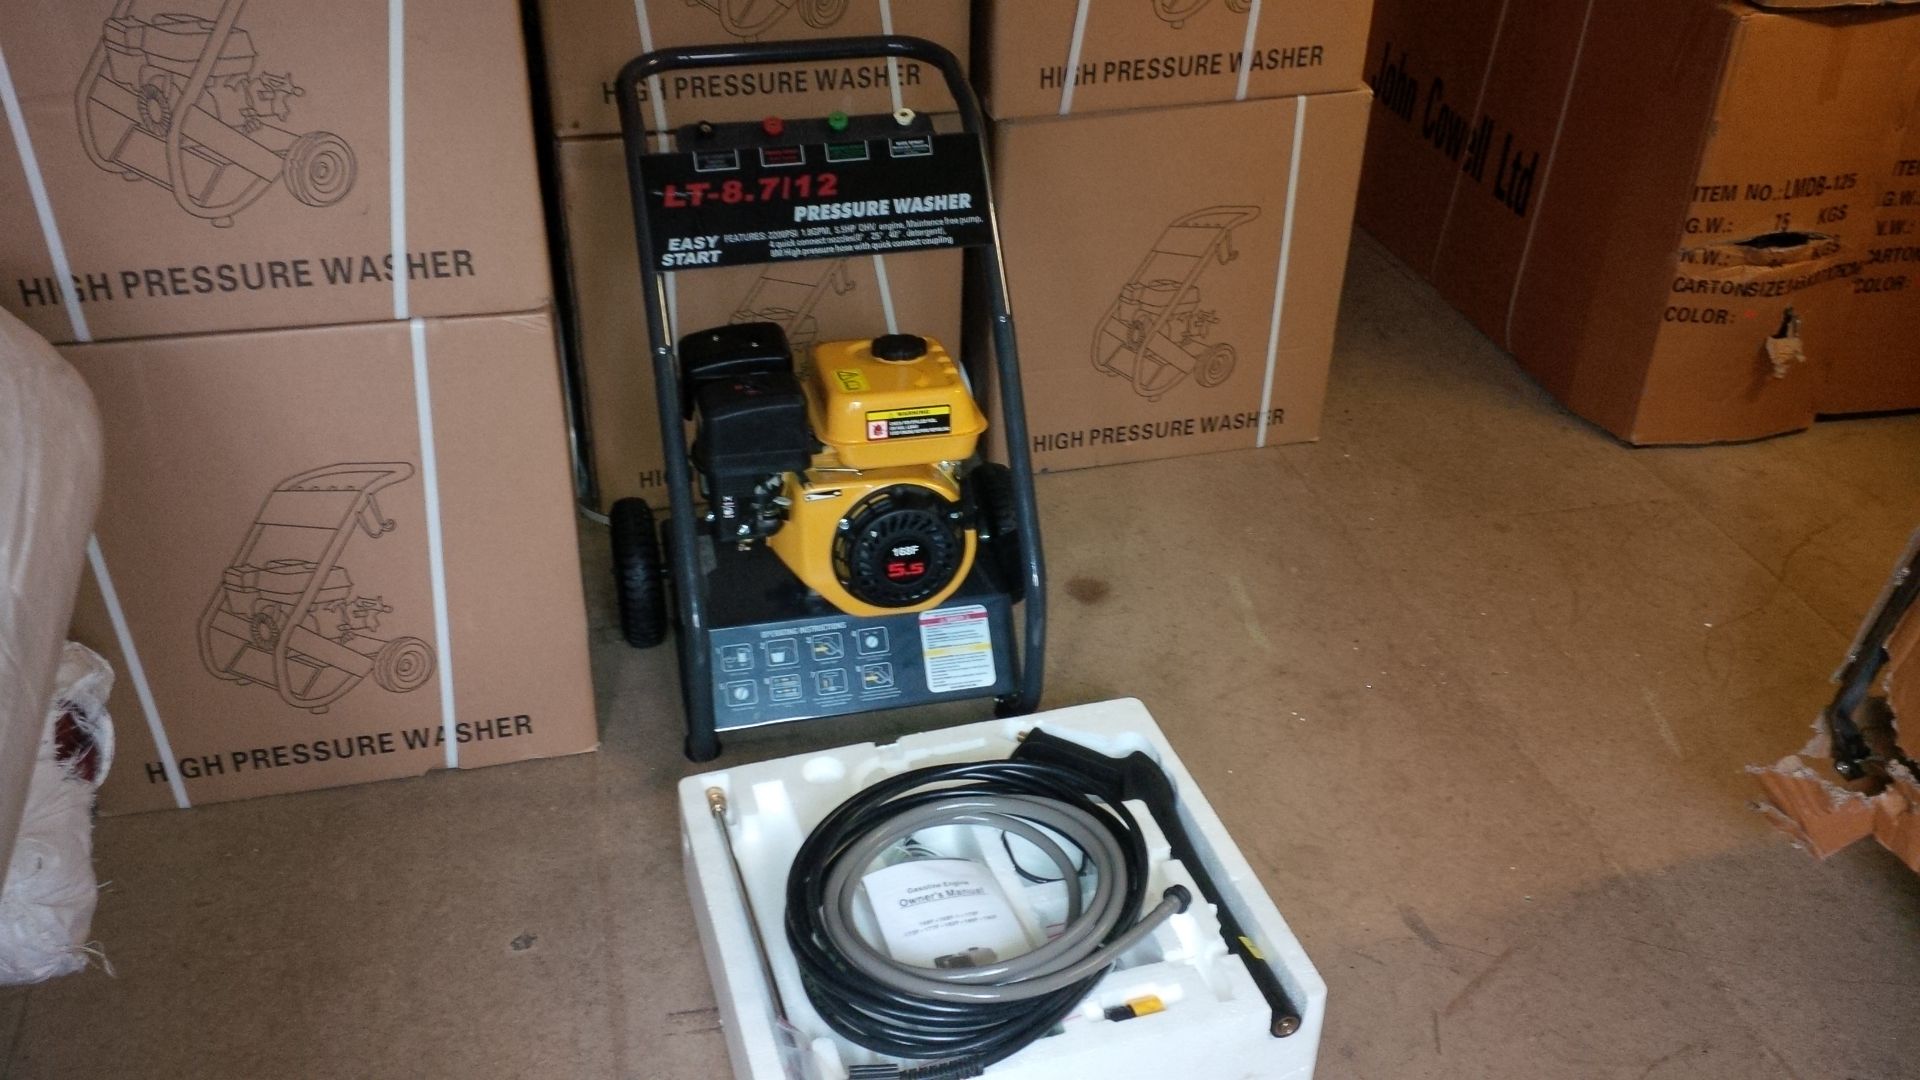 NEW BOXED BRAND NEW 5.5hp 2200psi PETROL PRESSURE WASHER £130+VAT